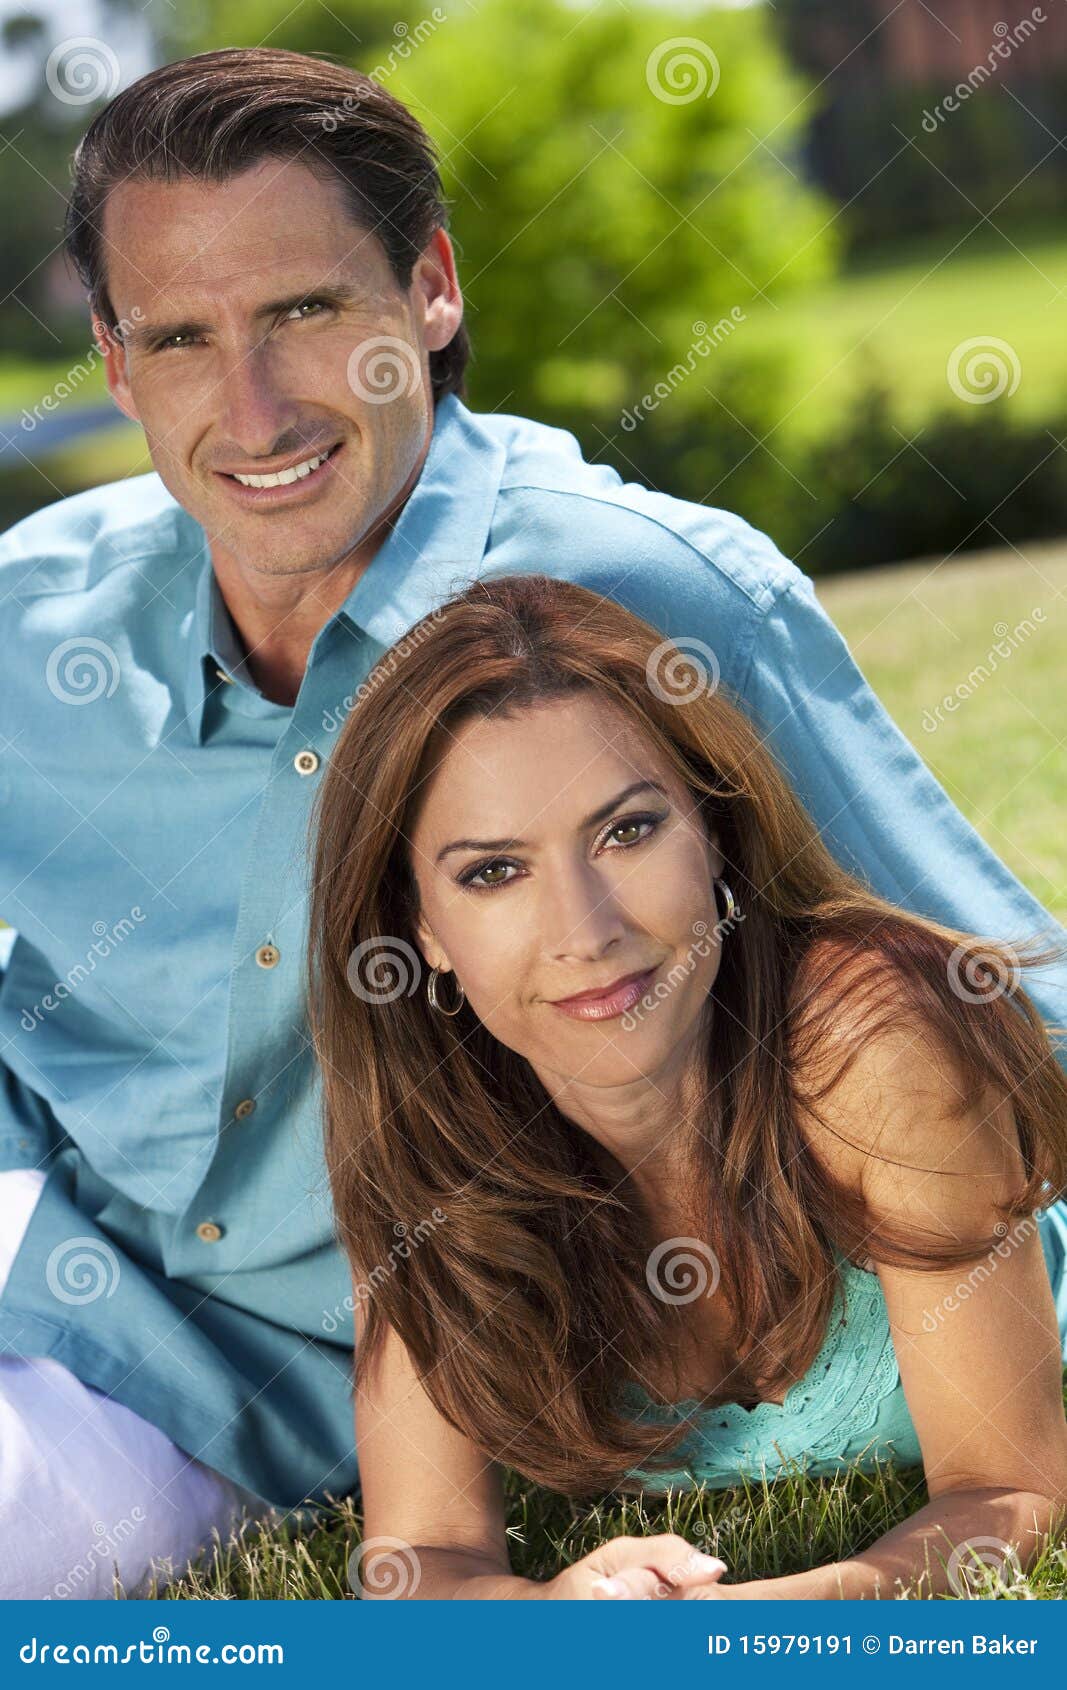 http://thumbs.dreamstime.com/z/happy-man-woman-couple-outside-smiling-15979191.jpg